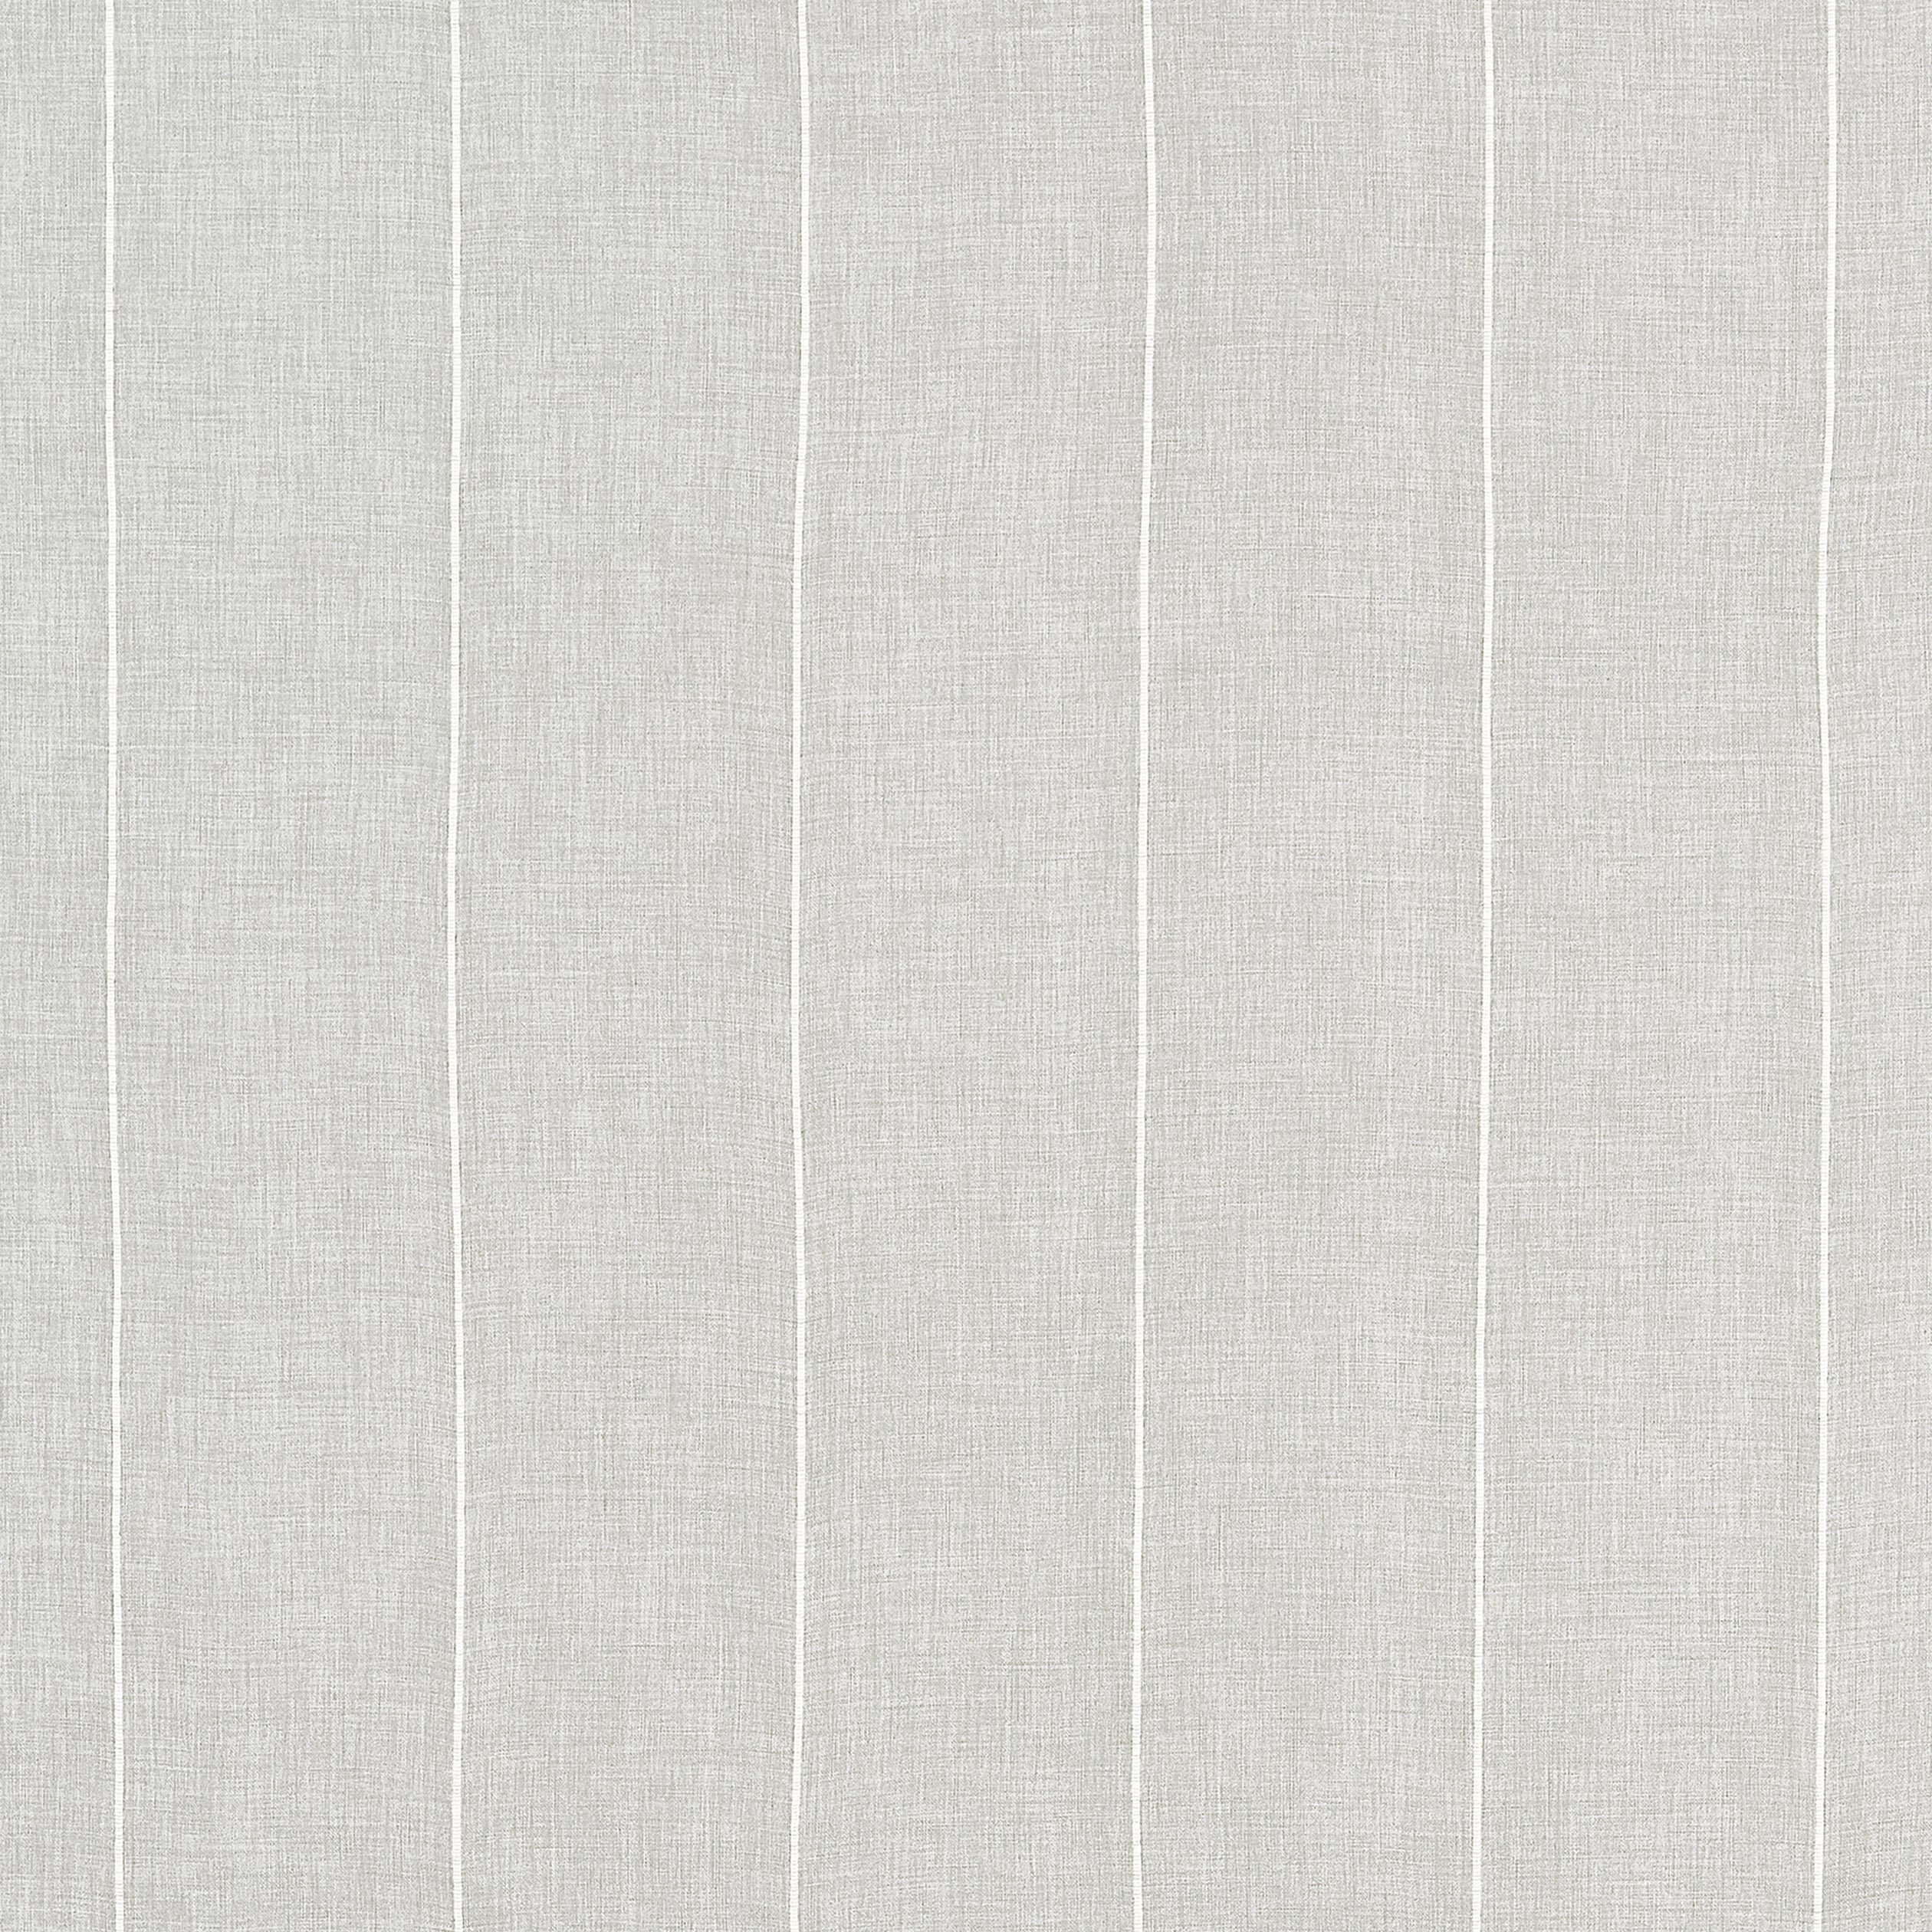 Crestline fabric in sterling color - pattern number FWW81739 - by Thibaut in the Locale Wide Width collection